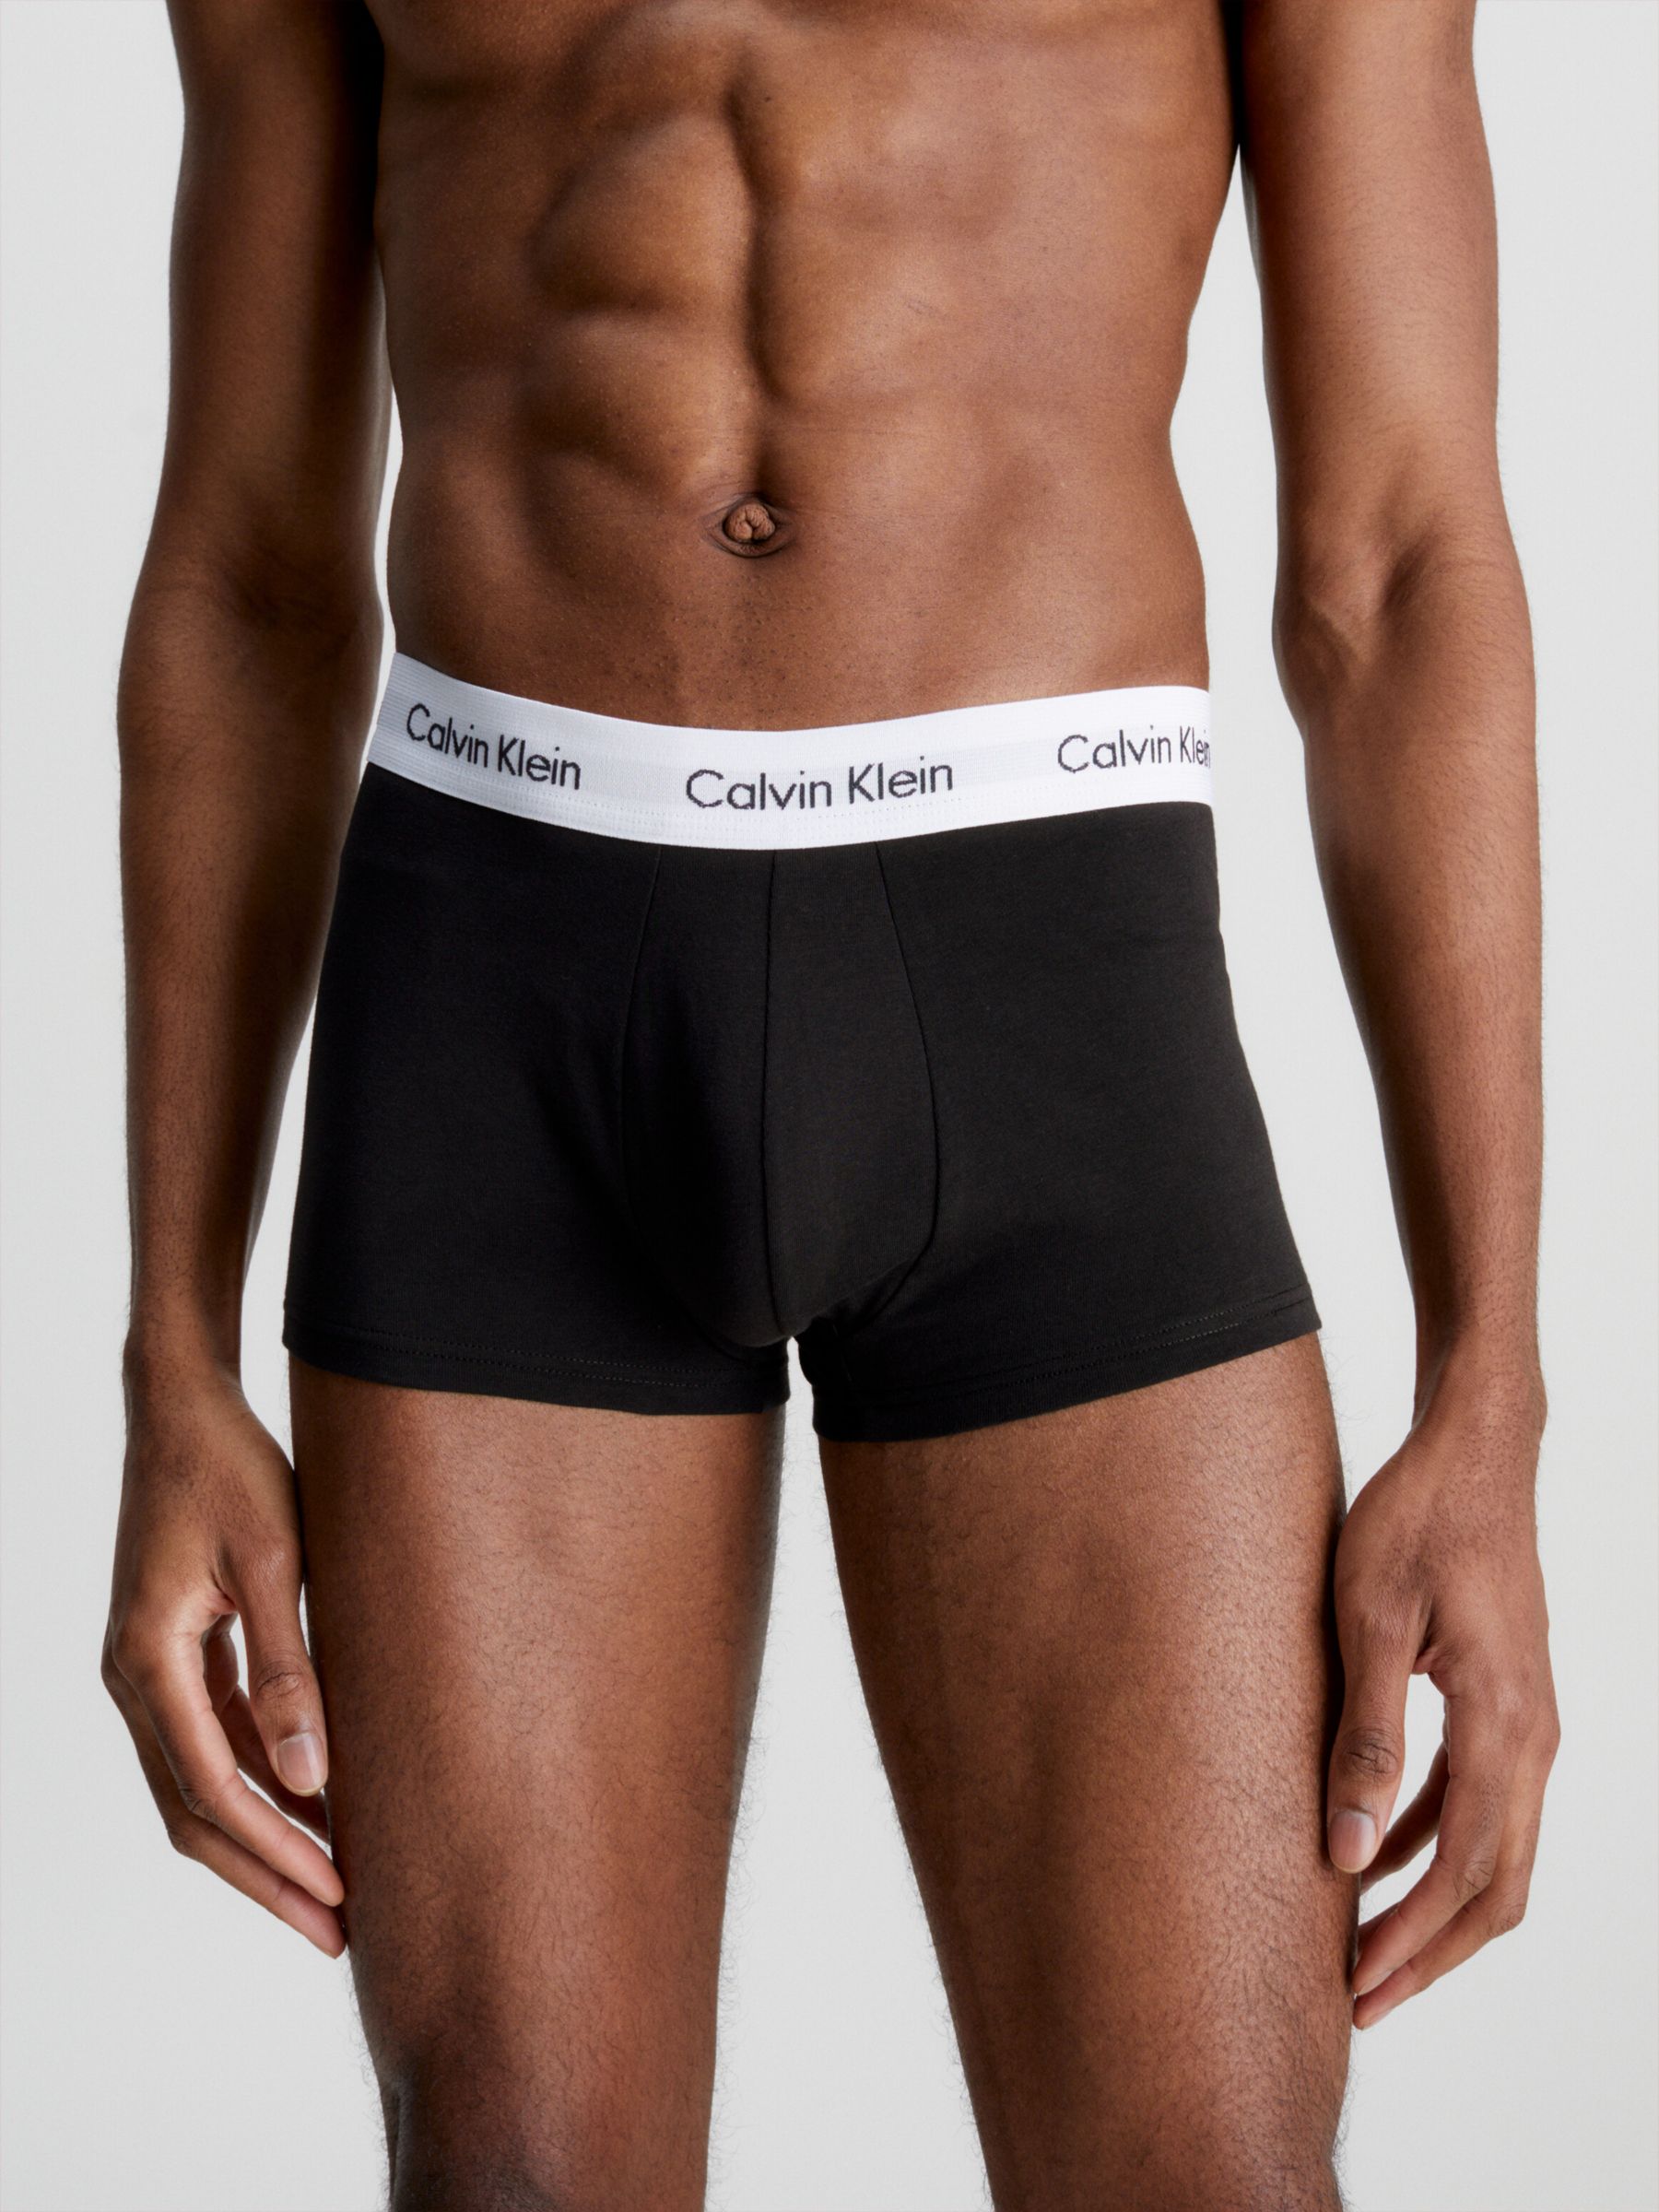 Calvin Klein Low Rise Stretch Trunks, Pack 3, Black at John Lewis & Partners